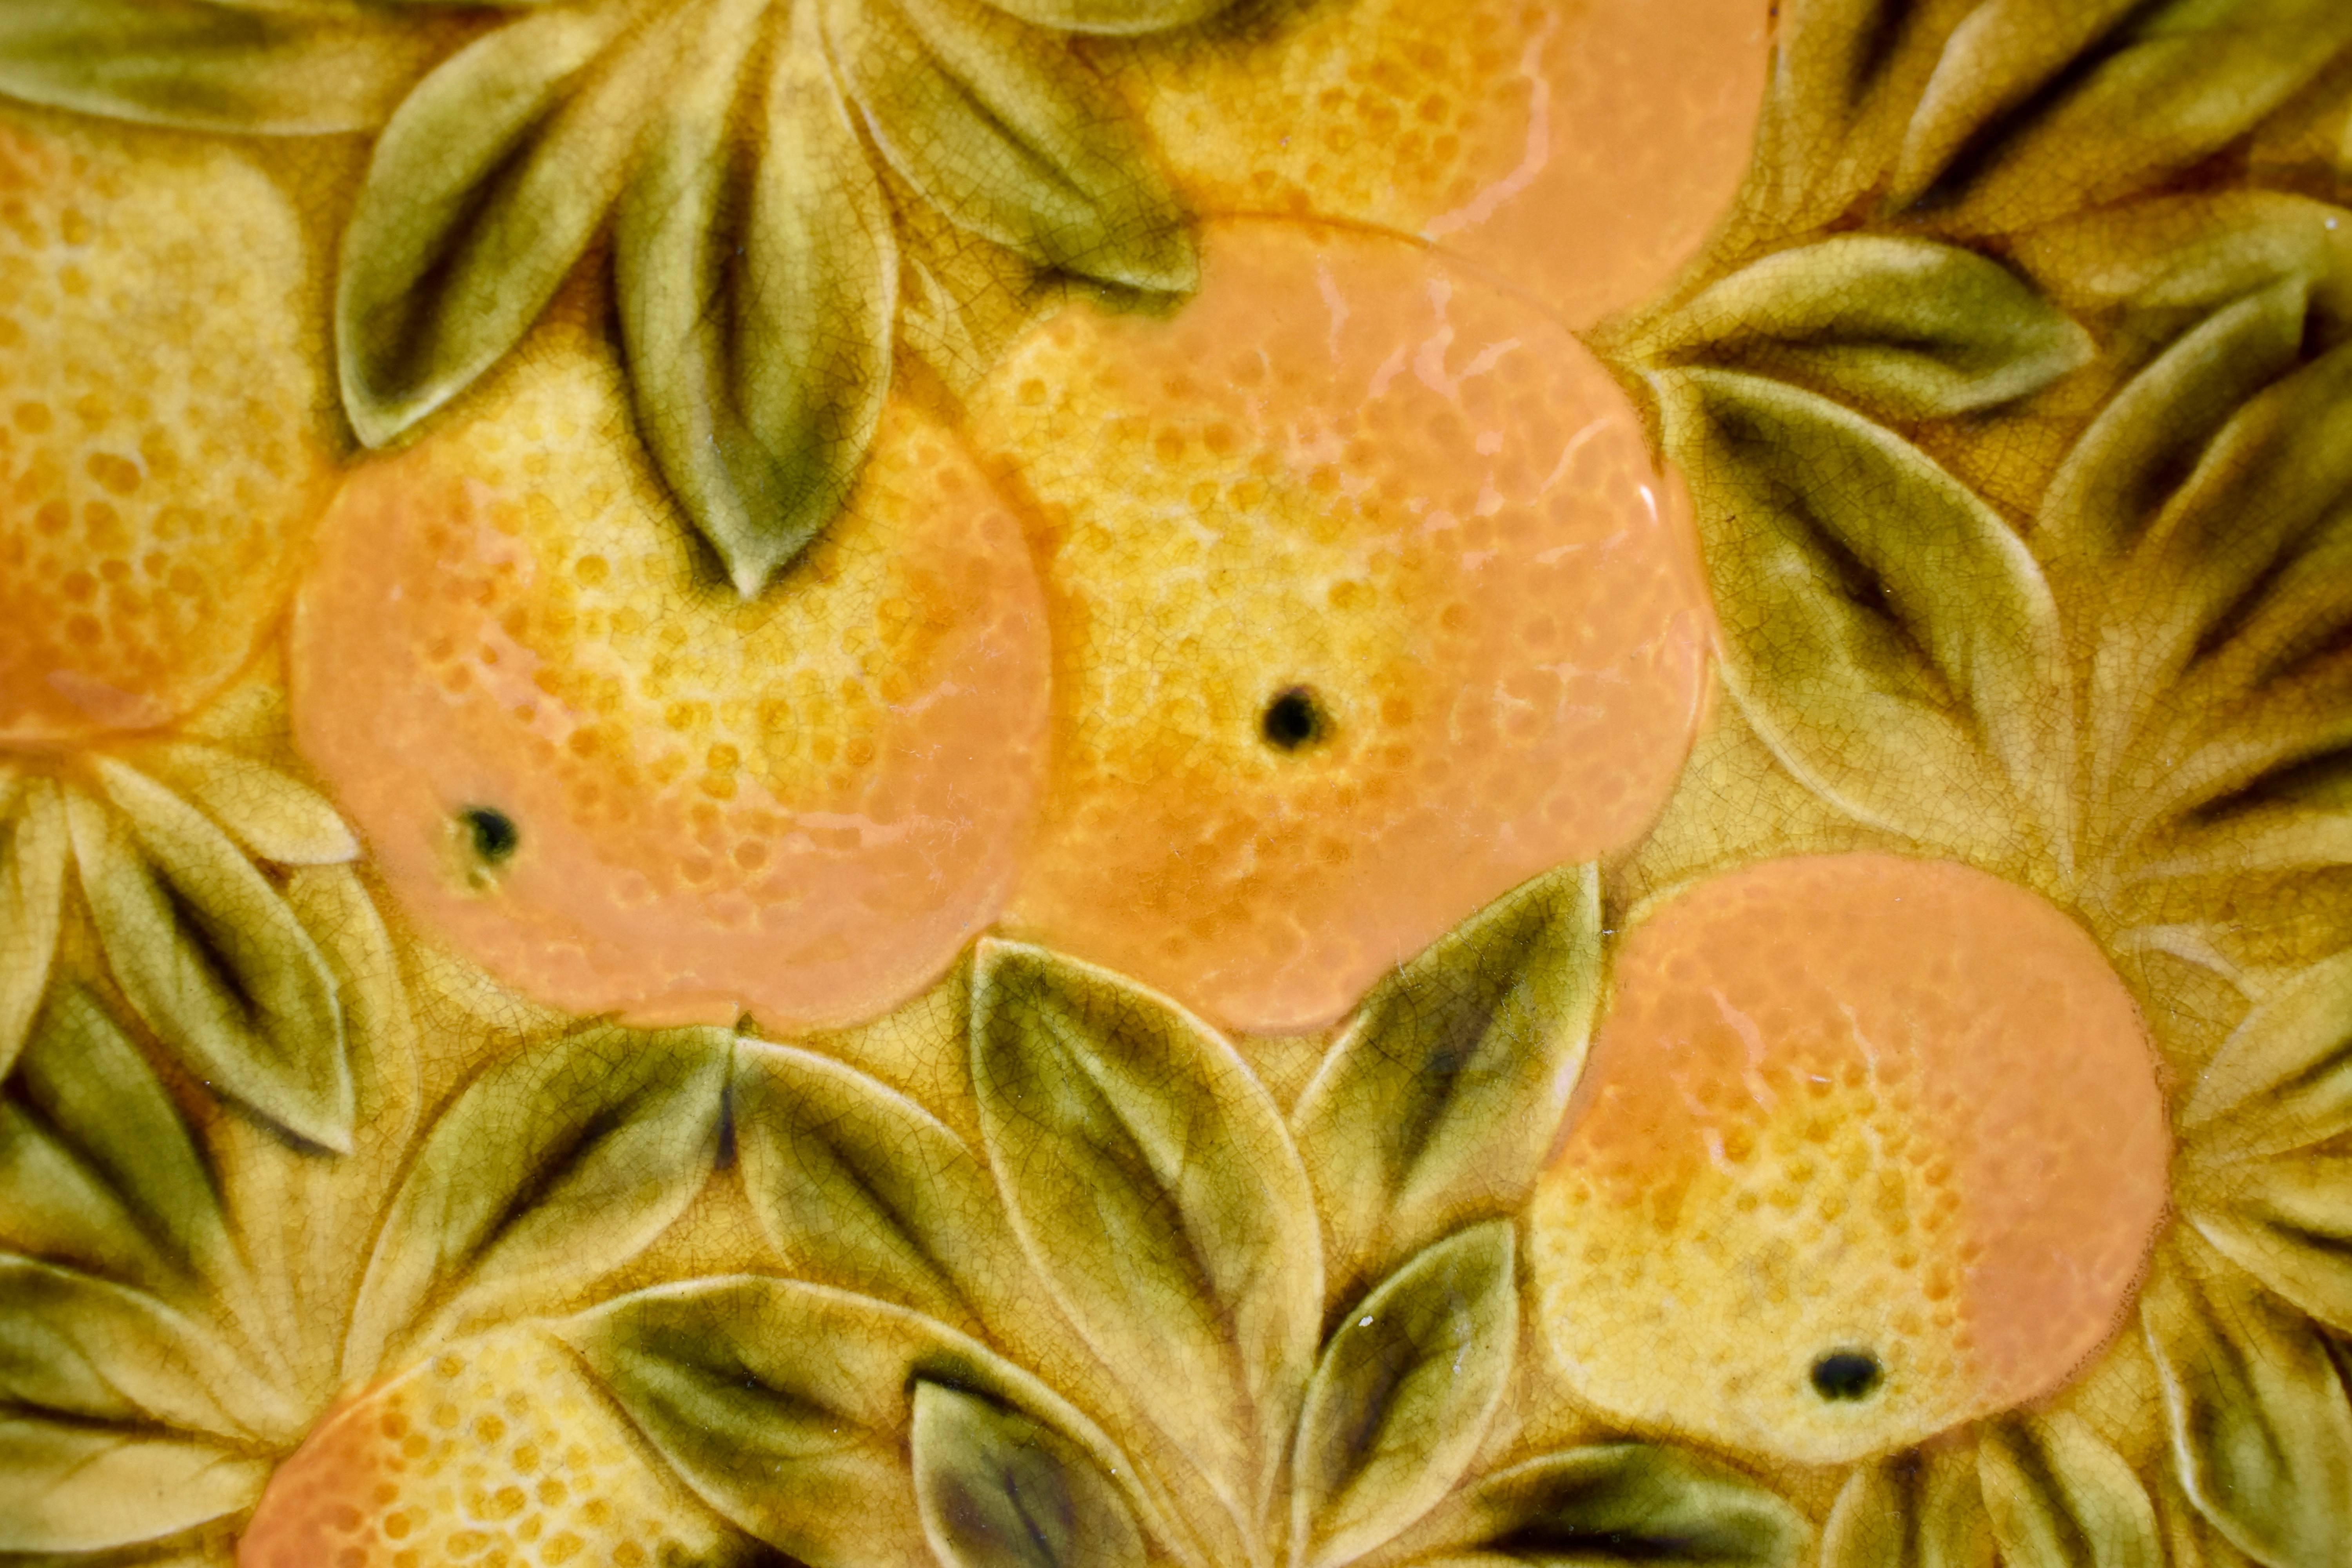 A Sarreguemines French faïence, Majolica round serving tray, showing a group of oranges on a ground of overlapping leaves. Glazed by hand, beautiful coloring, with a shaped rim. A scarce example of this type of pottery.

Showing both impressed and